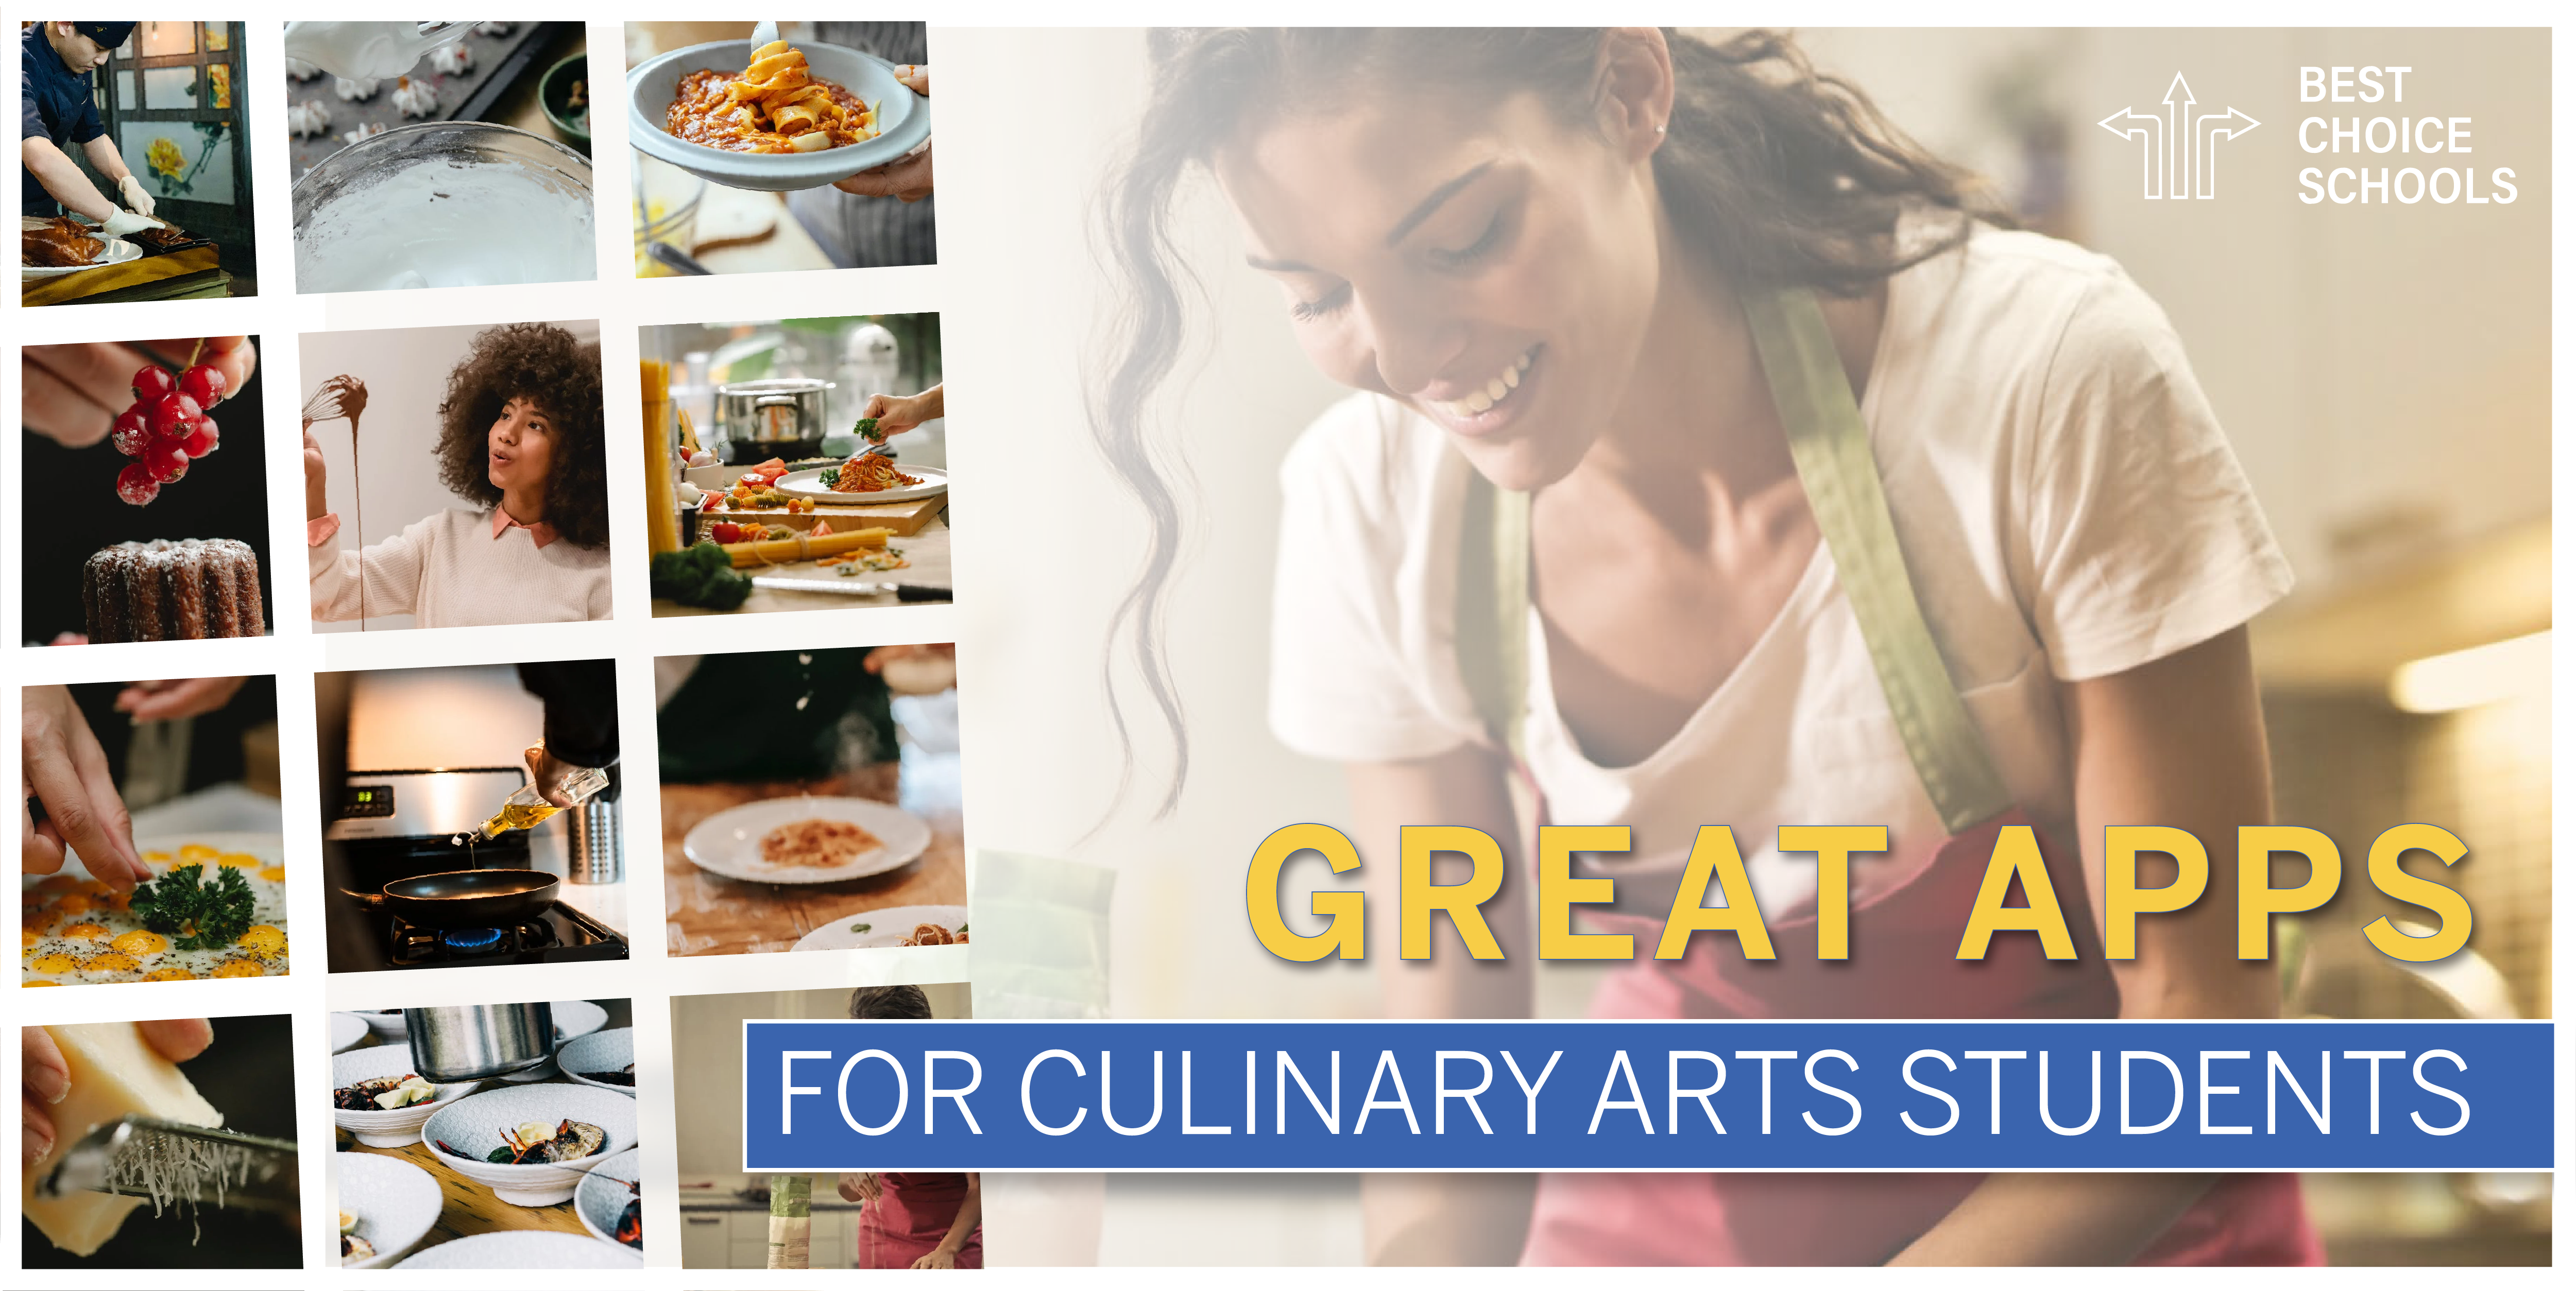 https://www.bestchoiceschools.com/wp-content/uploads/2021/07/Great-Apps-for-Culinary-Arts-Students.png